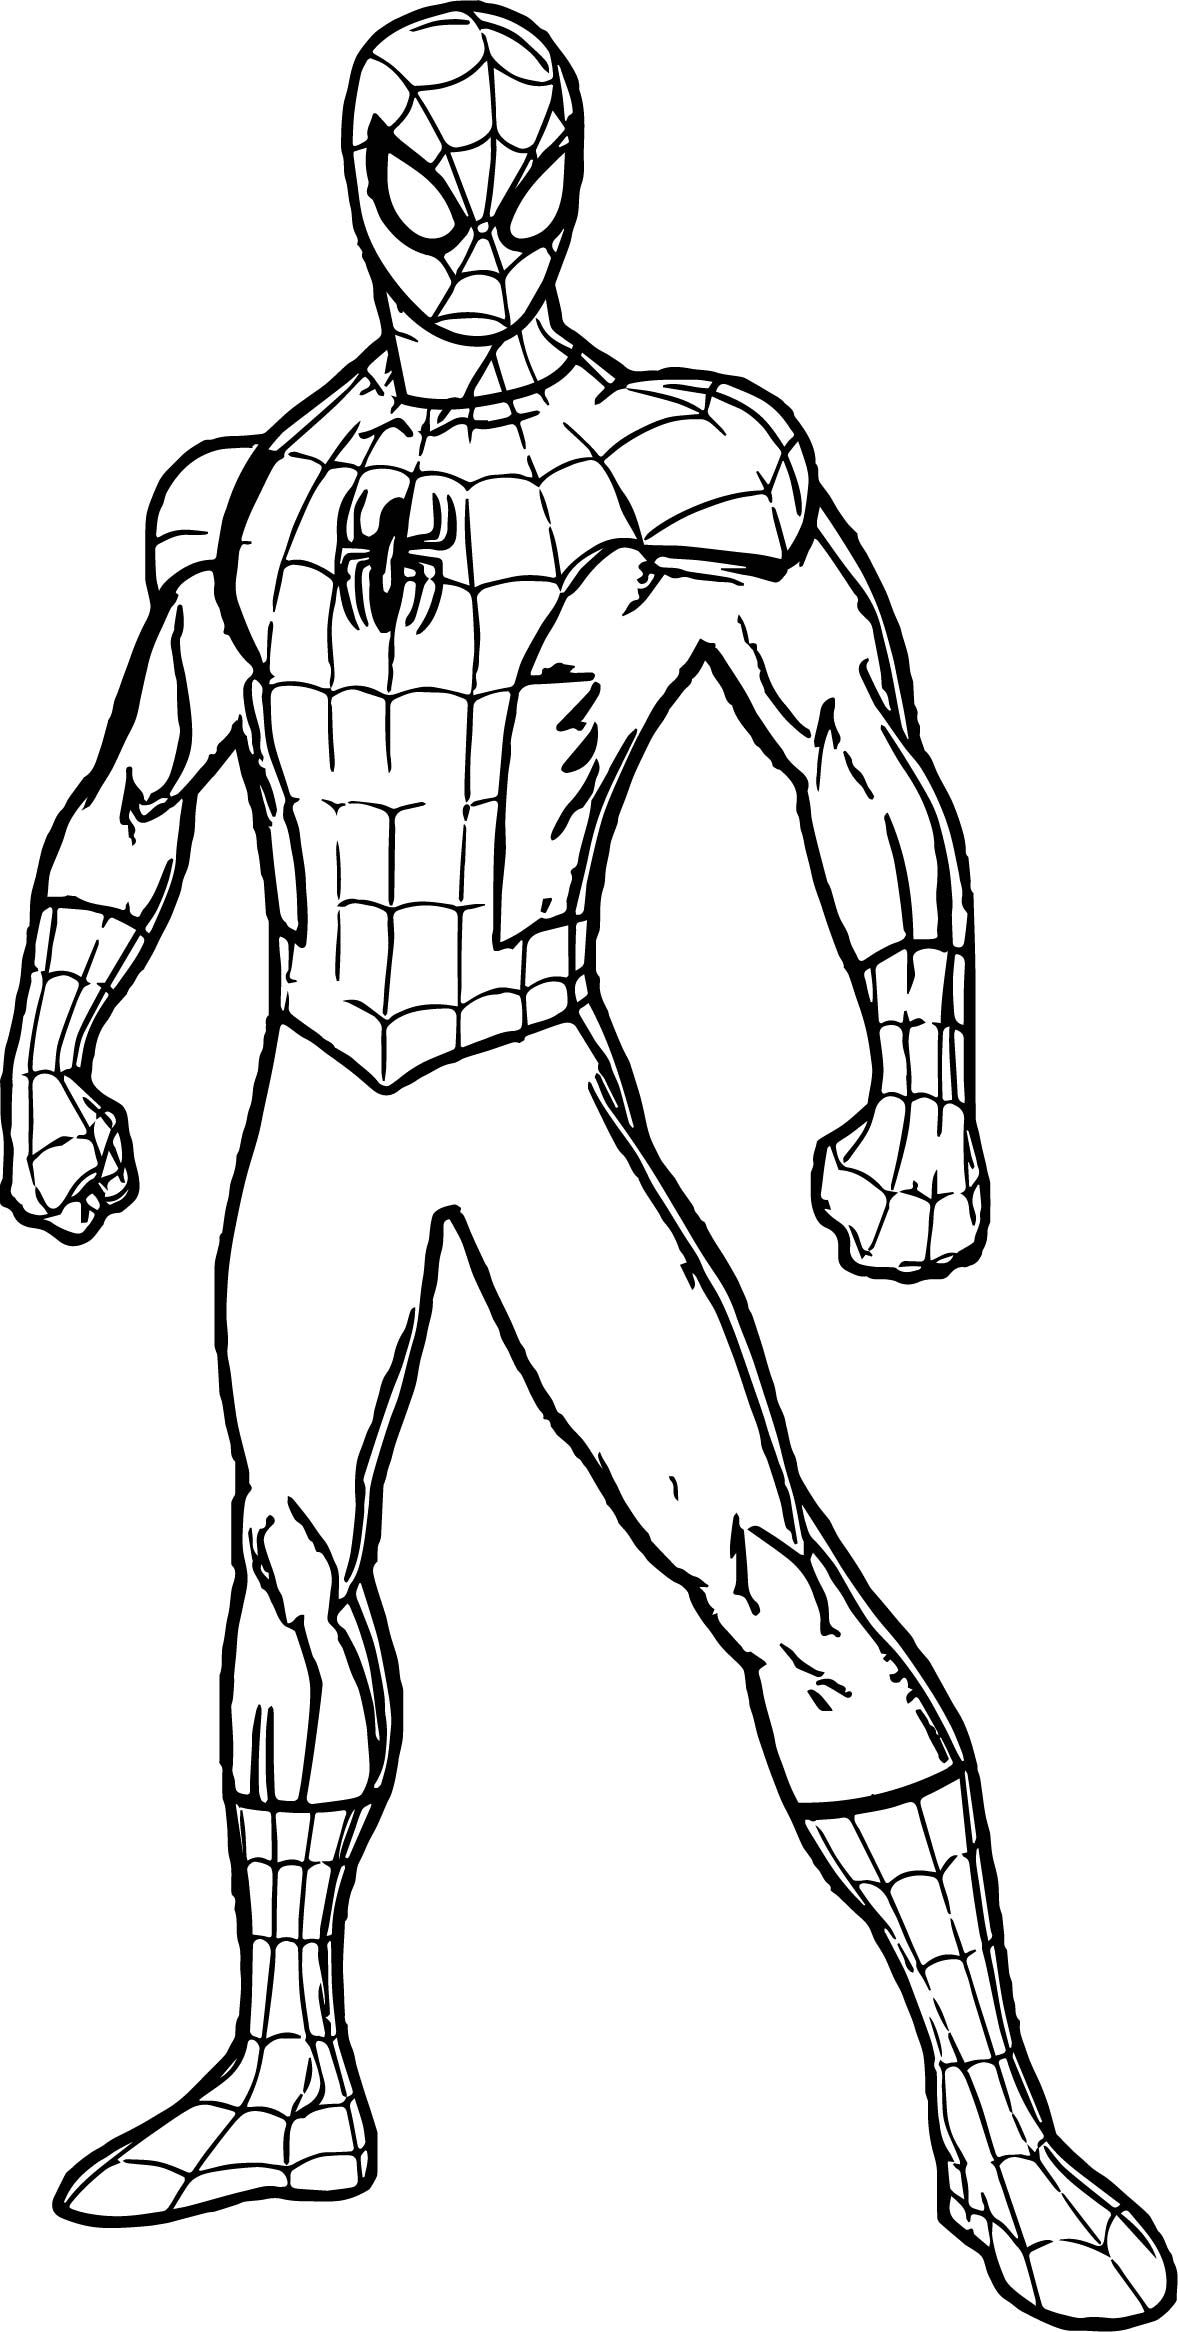 Coloring pages top spiderman coloring pages for kids